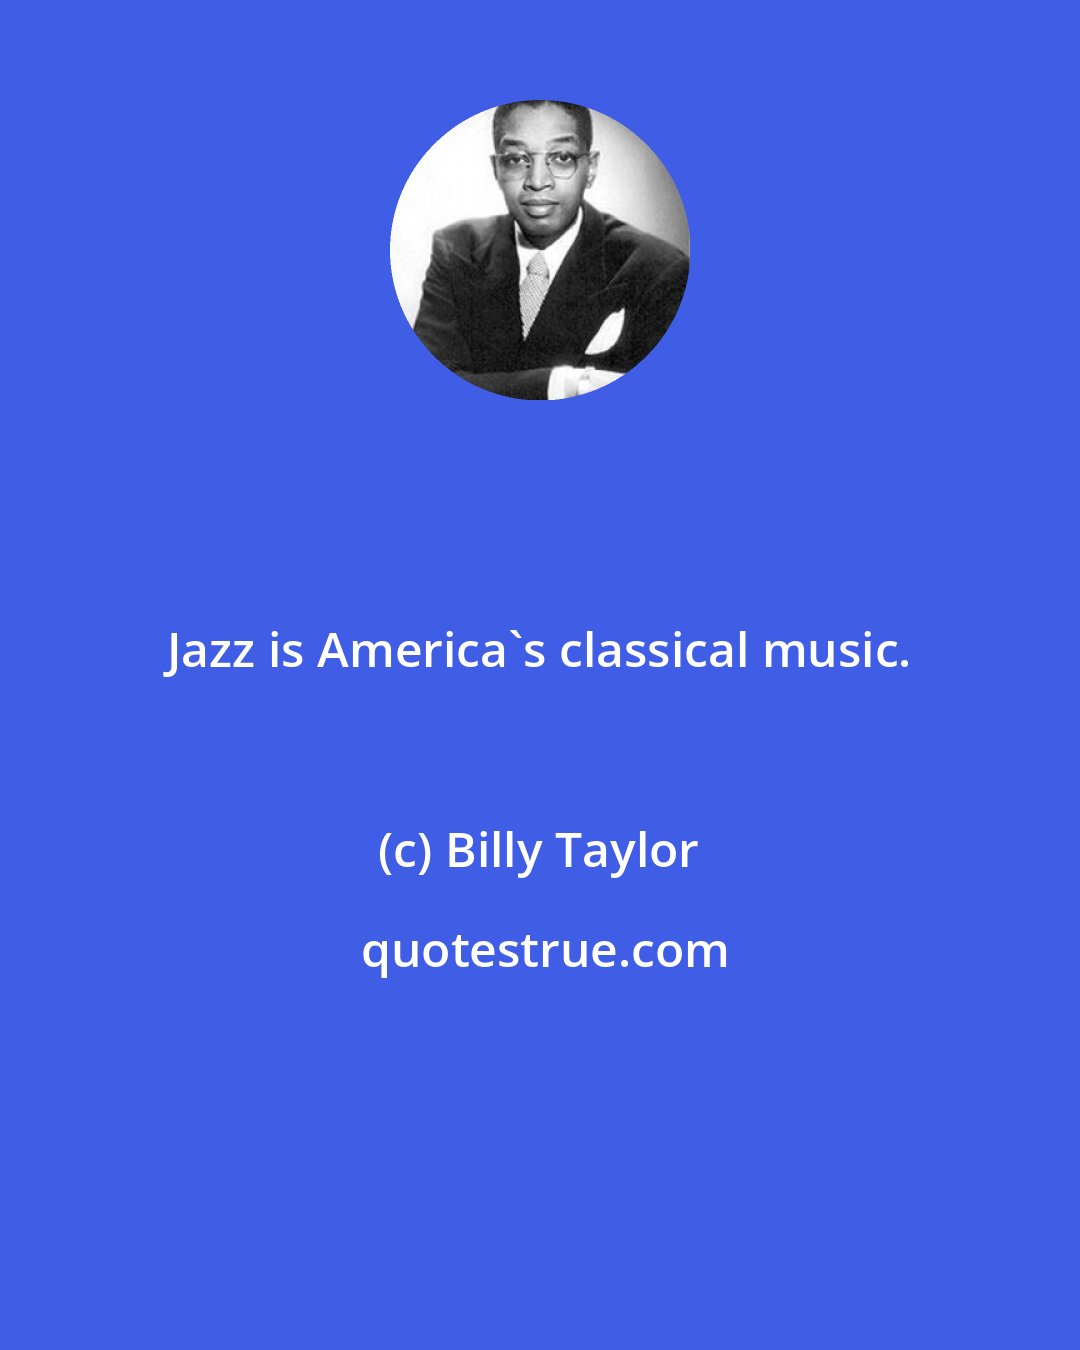 Billy Taylor: Jazz is America's classical music.